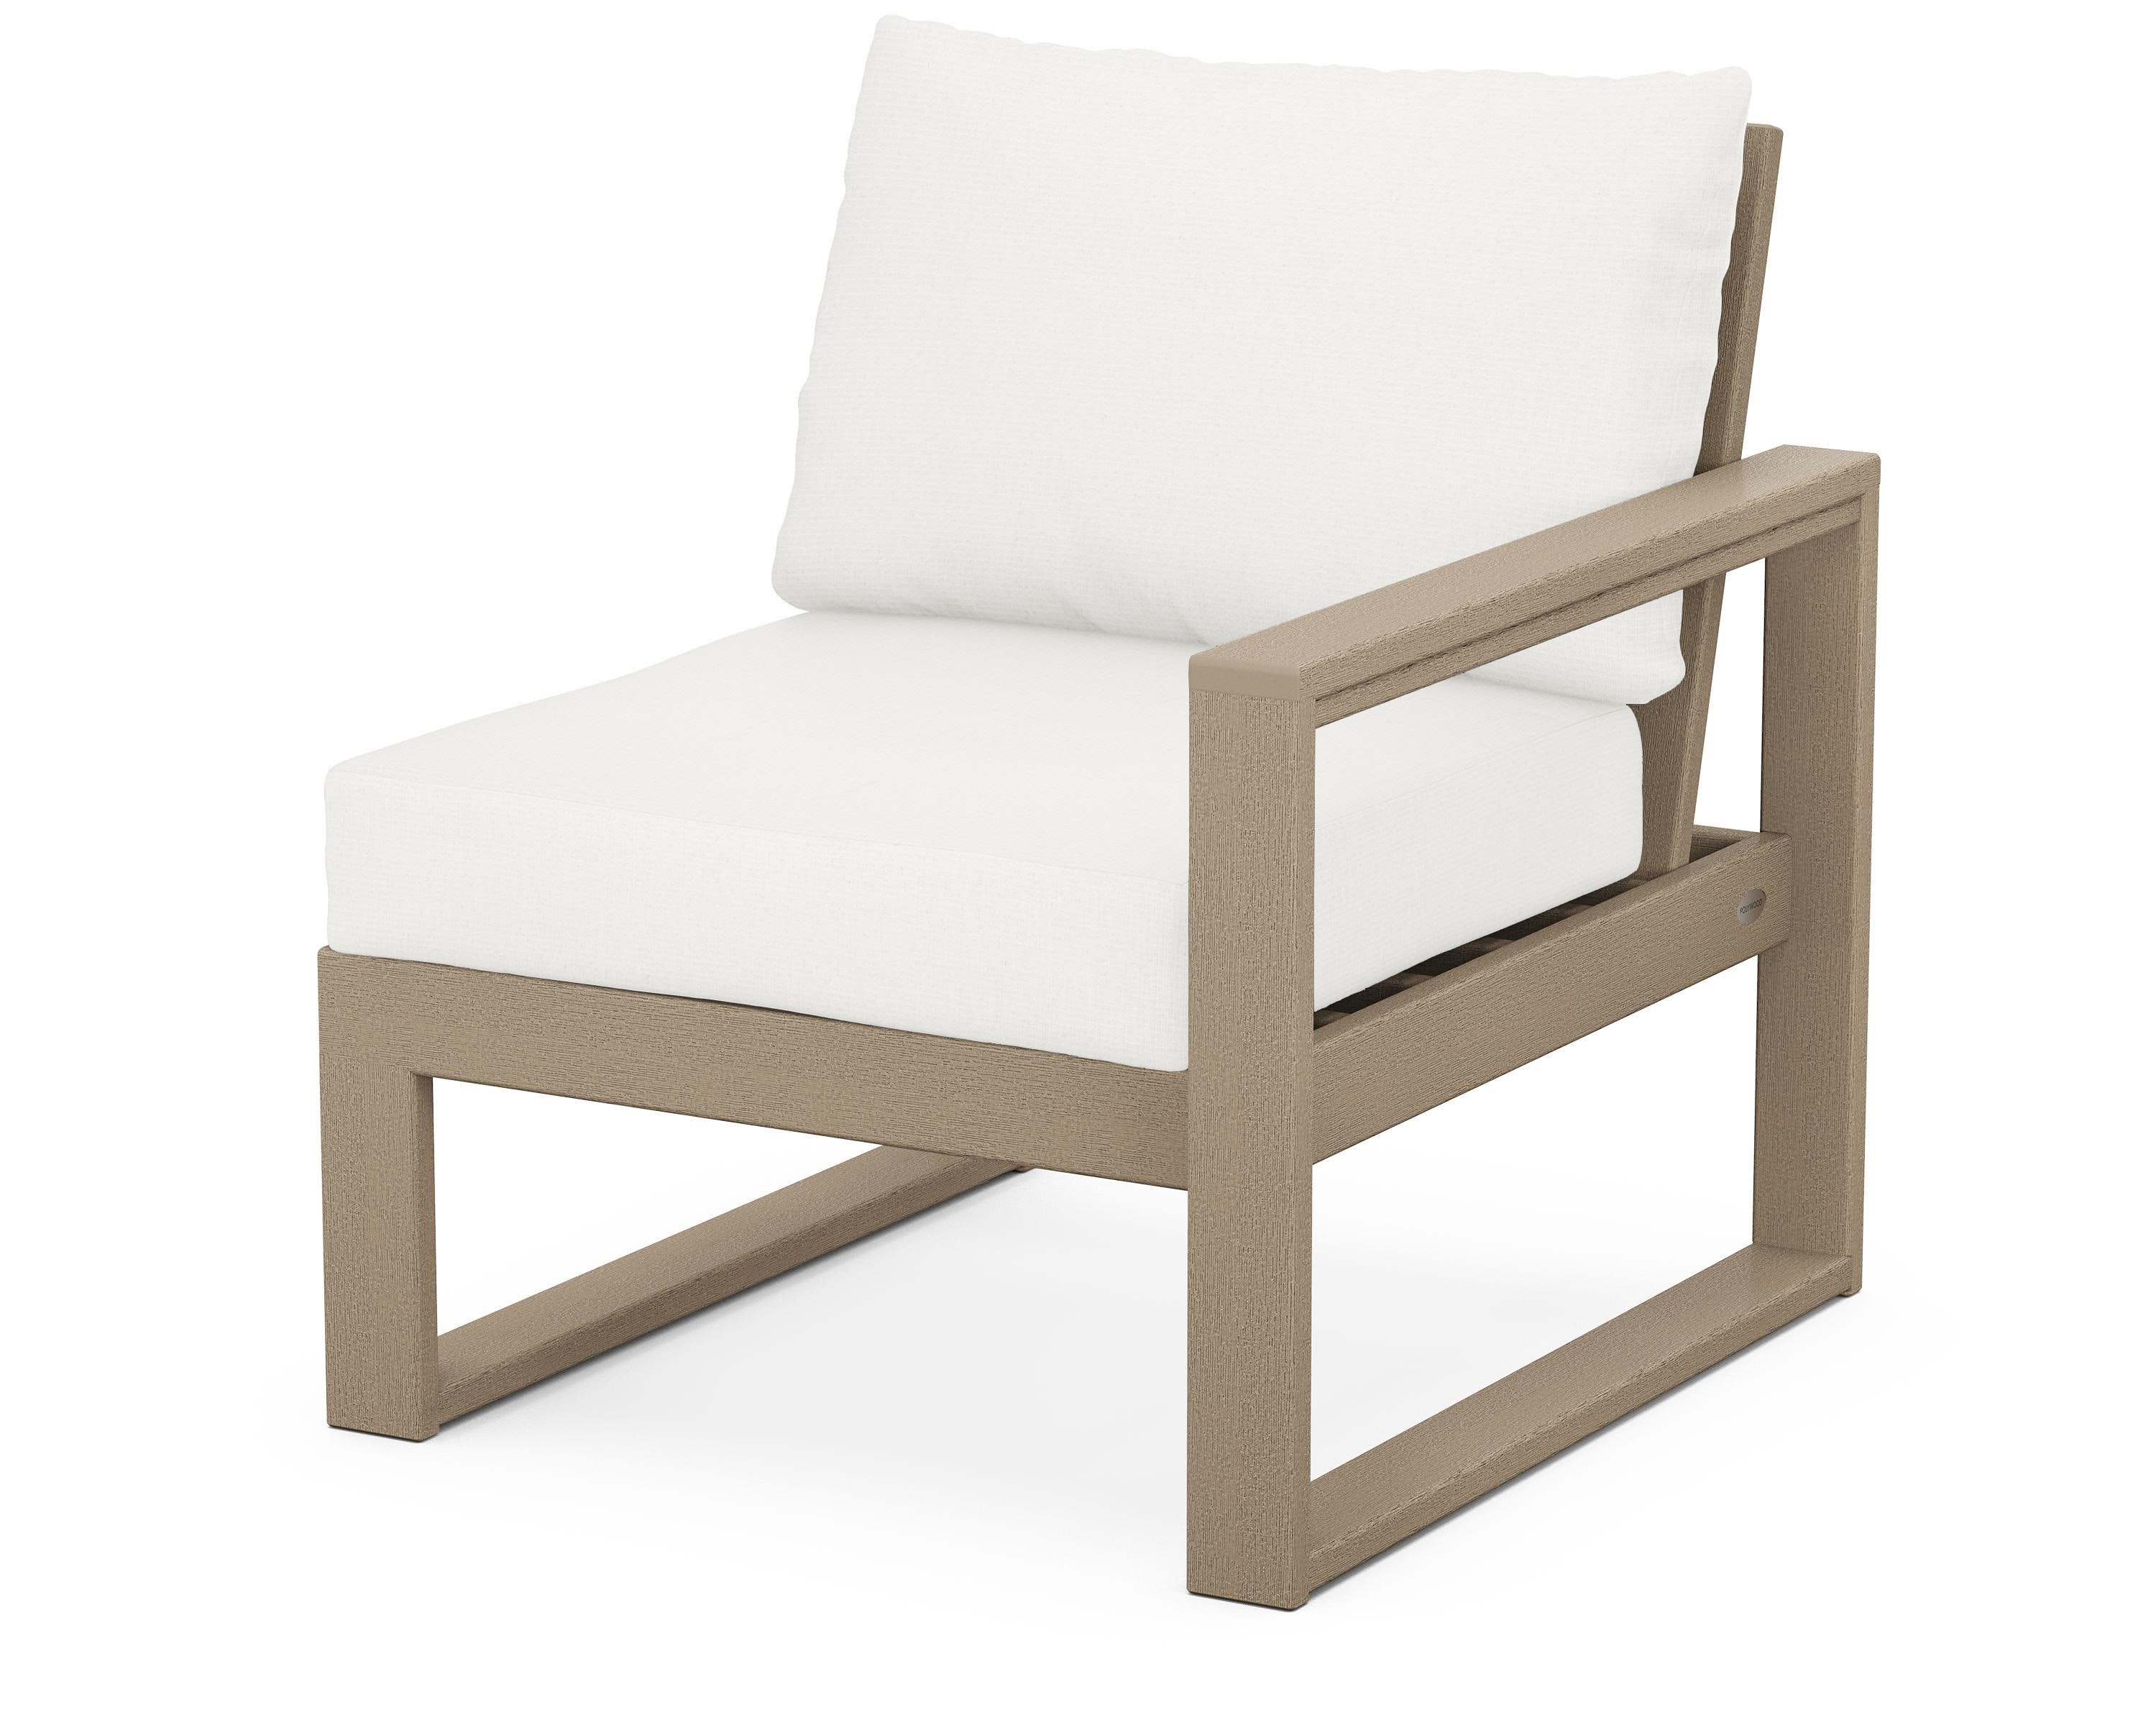 POLYWOOD EDGE Modular Right Arm Chair in Vintage Finish